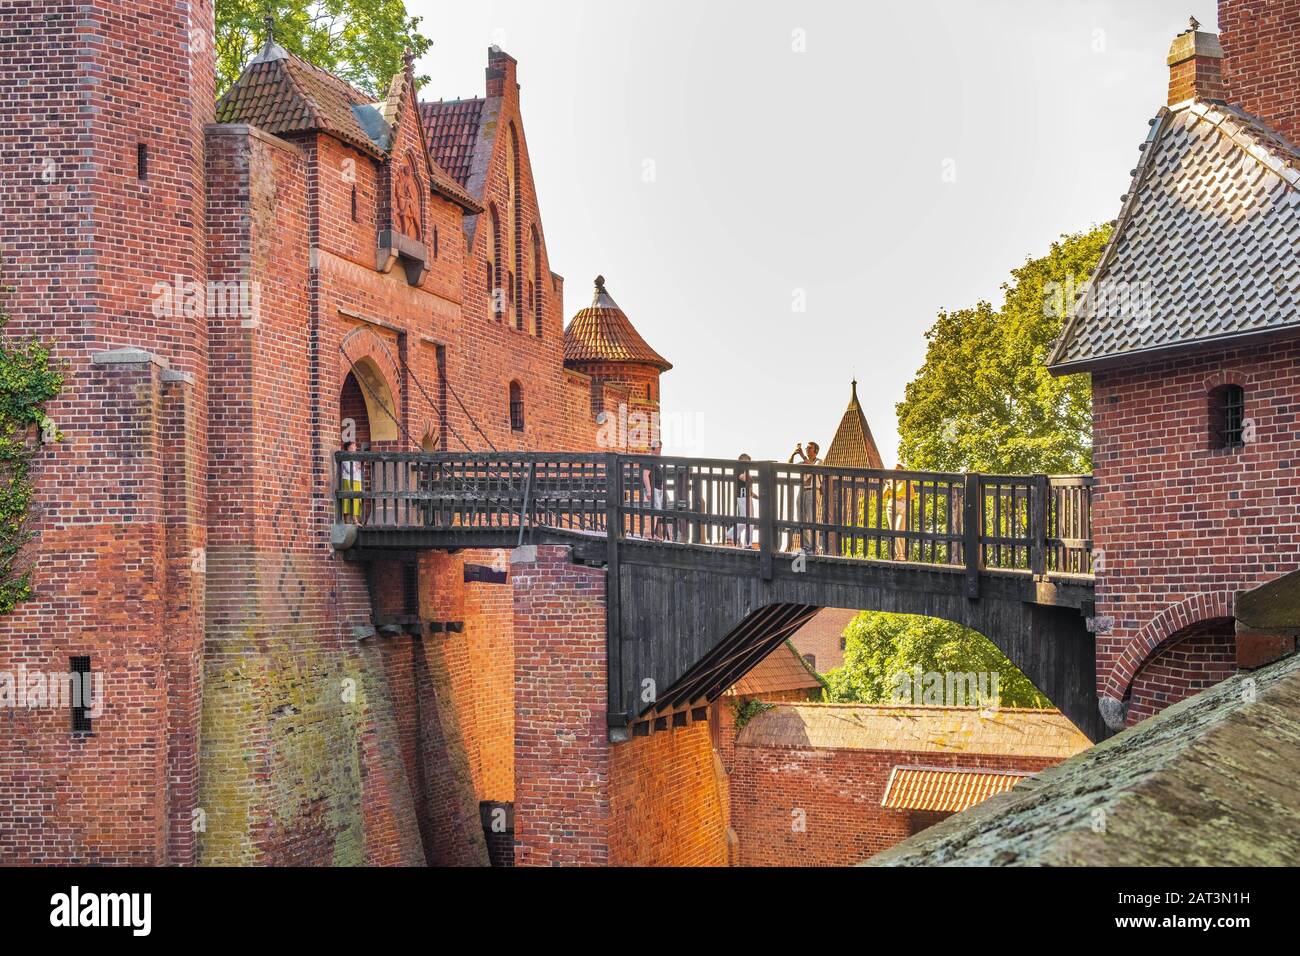 Malbork, Pomerania / Poland - 2019/08/24: High Castle fortress defense walls and fortifications of the Medieval Teutonic Order Castle in Malbork, Poland Stock Photo